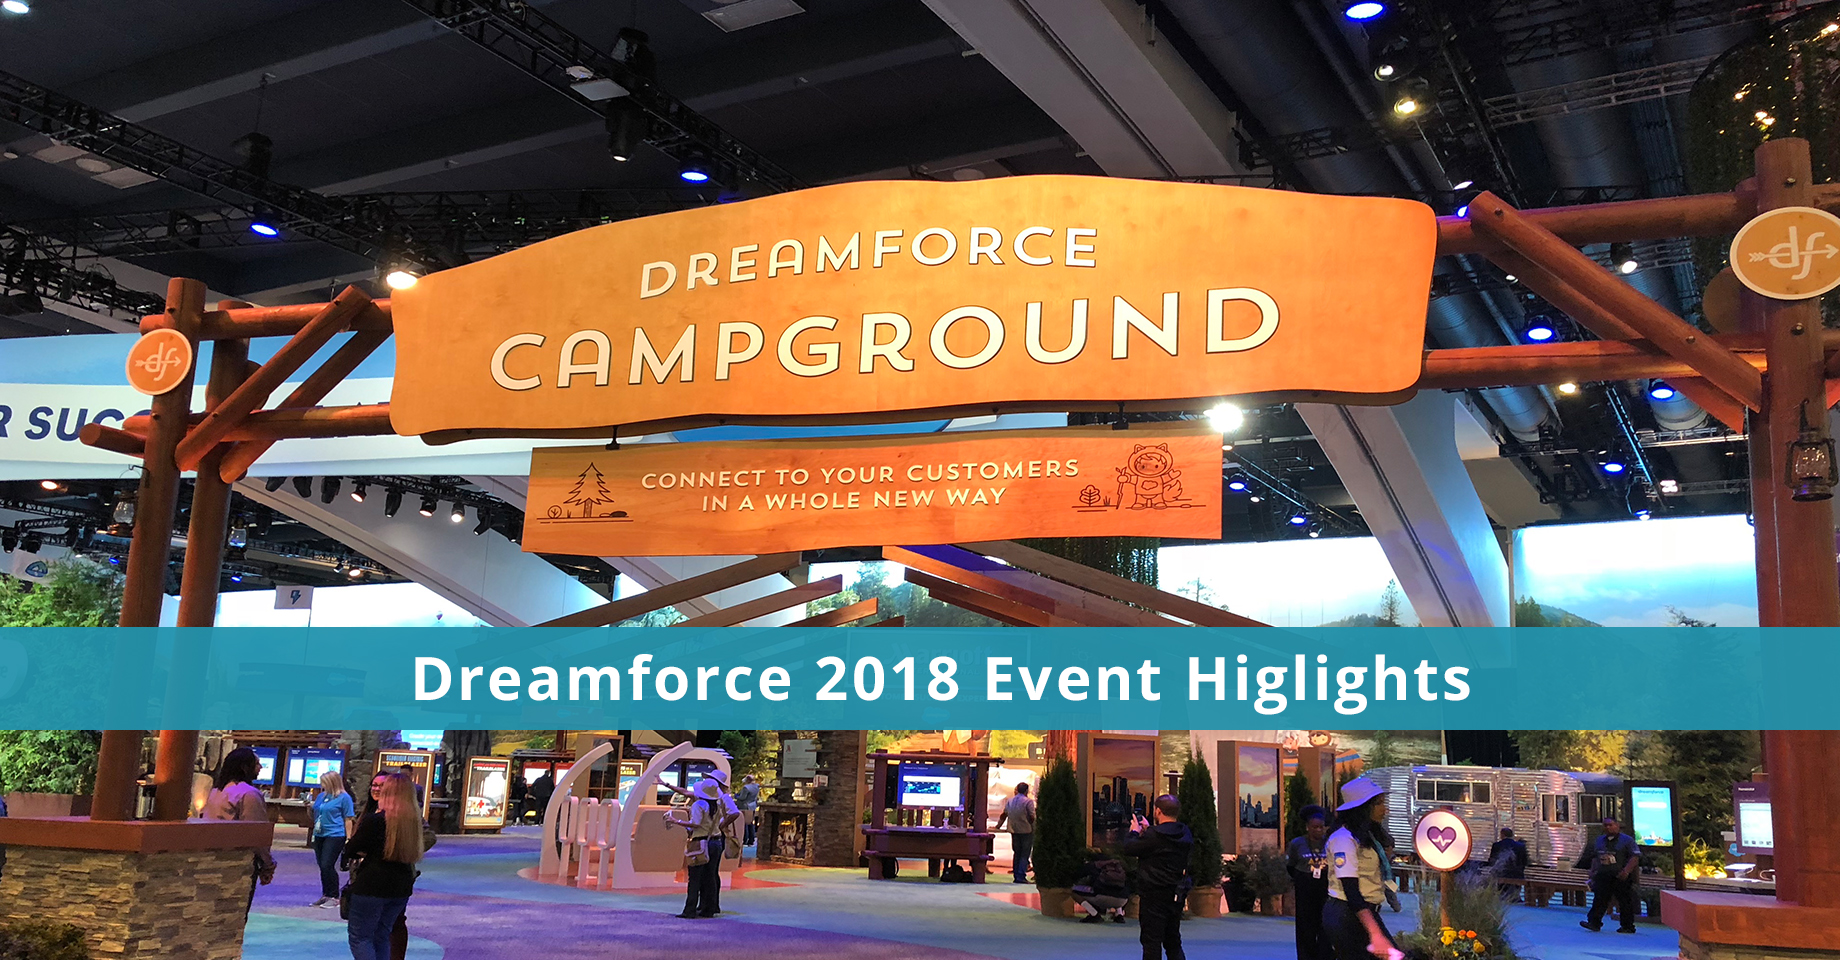 Dreamforce 2018: Highlights from this Year's Event